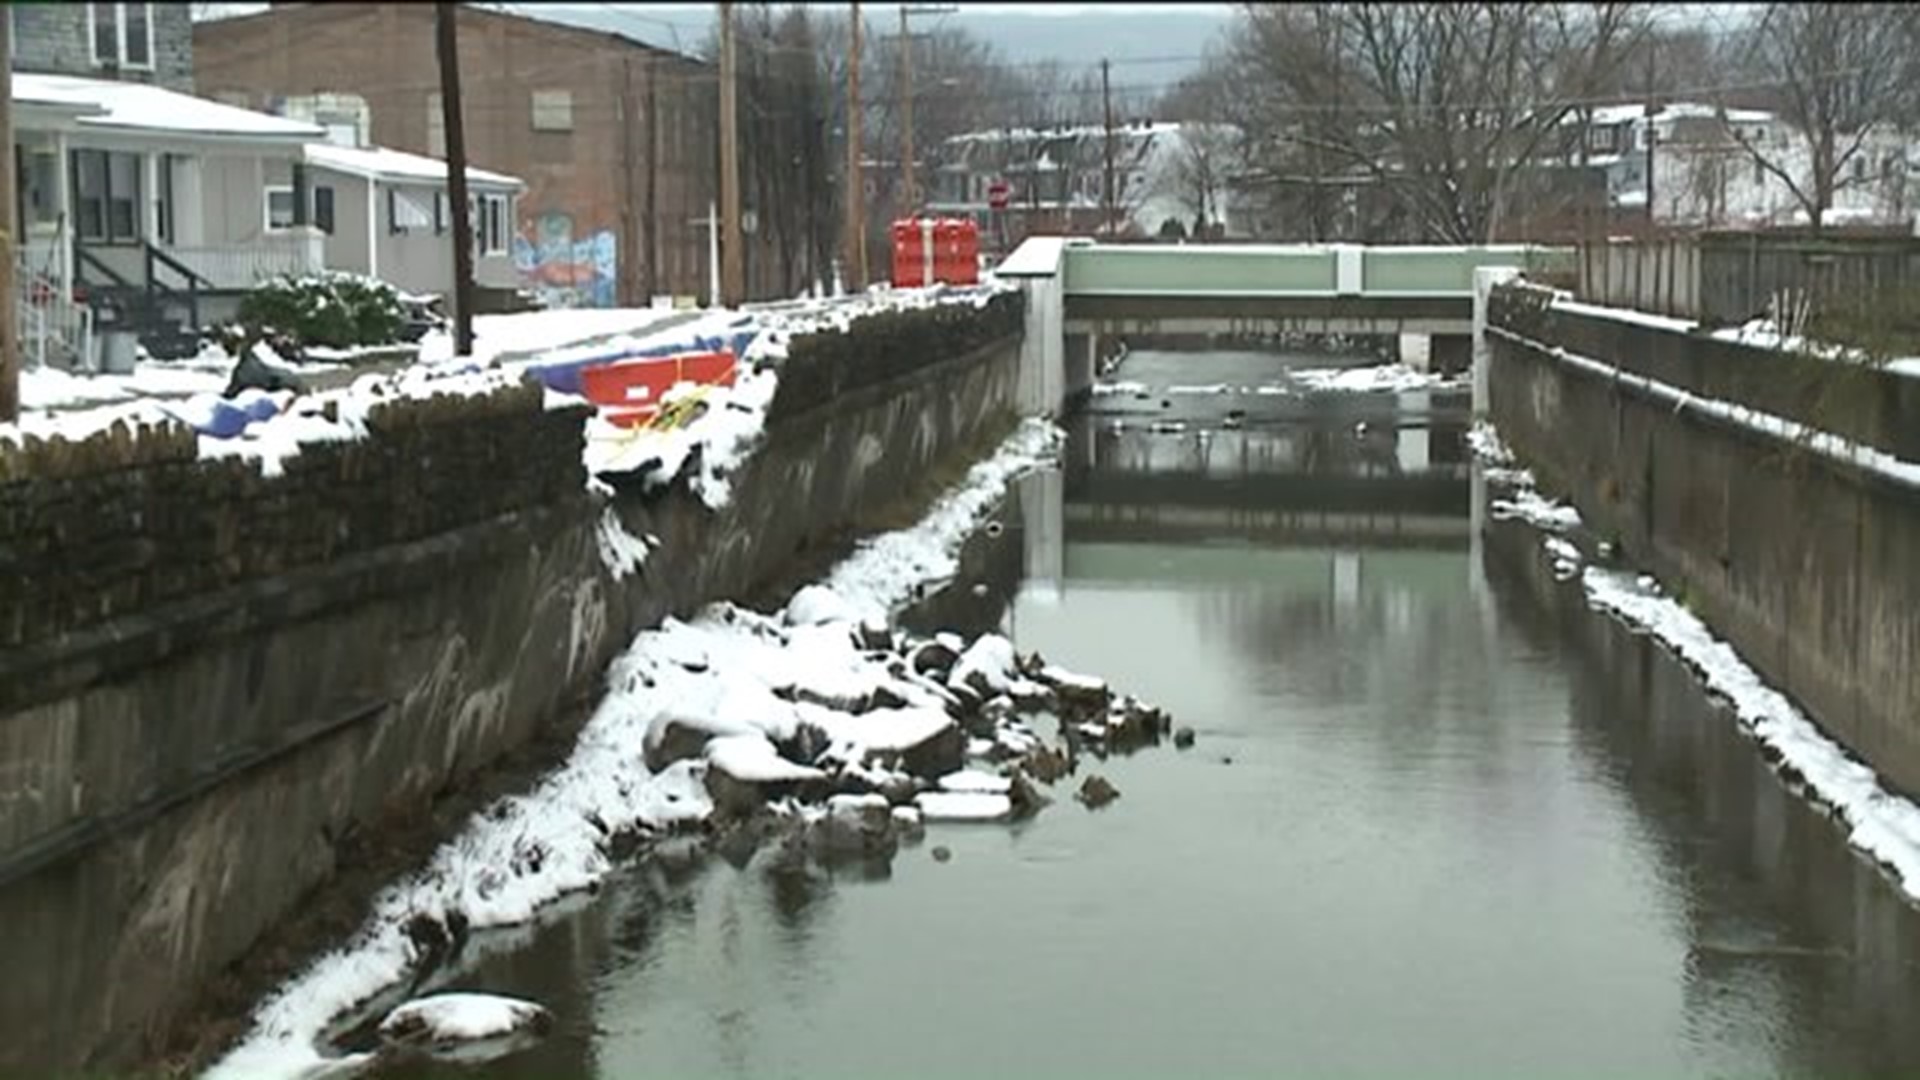 Lawmakers Commit Cash to Fix Flood Wall